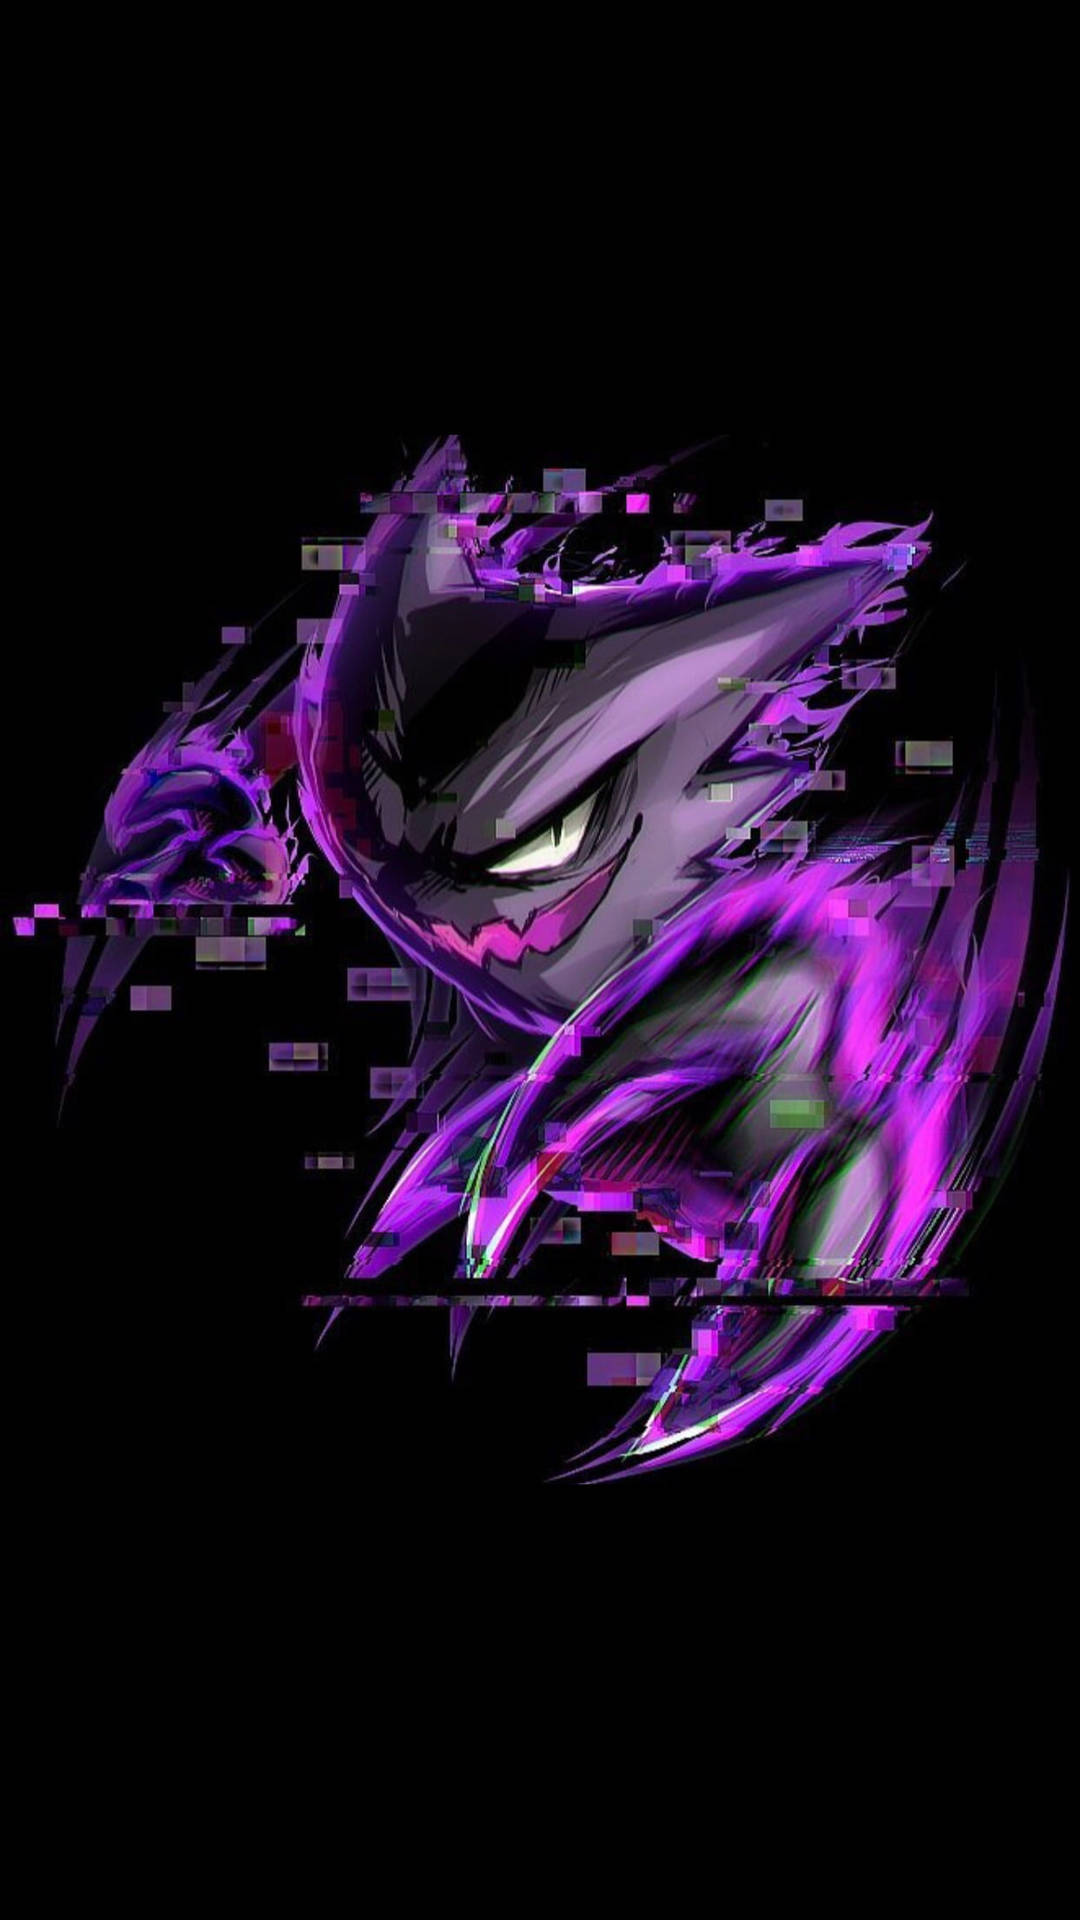 30 Haunter Pokémon HD Wallpapers and Backgrounds